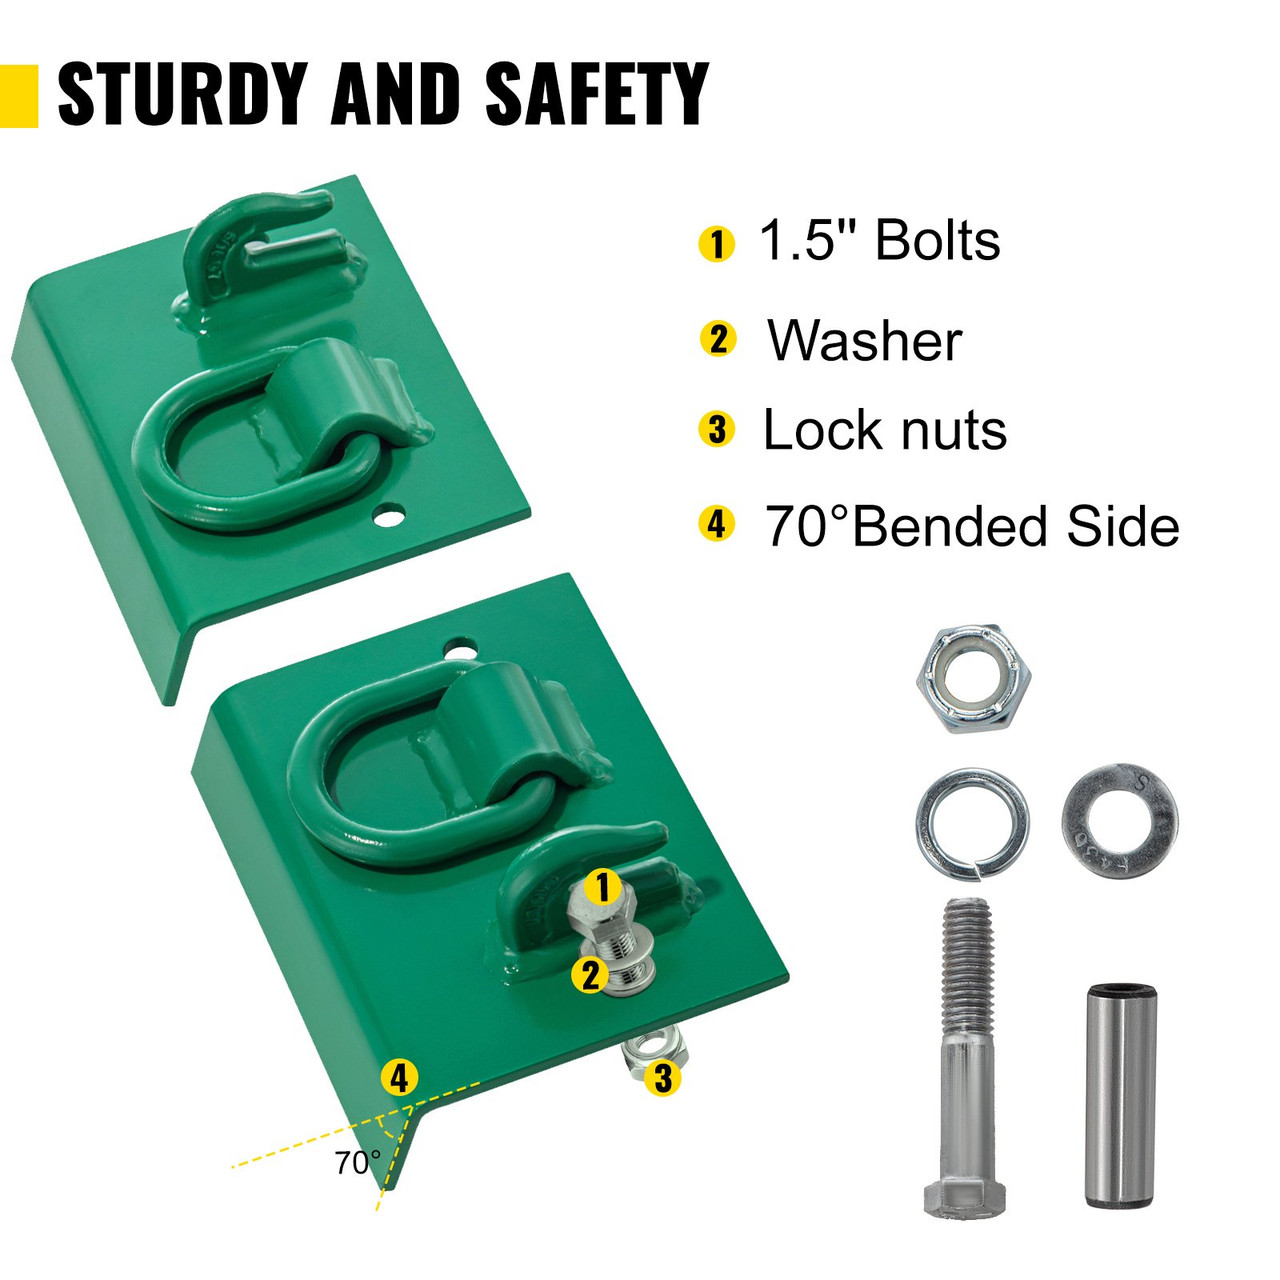 Tractor Bolt on Hooks, 1/4" Bolt on Grab Hooks, 4700LBS G70 Forged Bolt on Hooks for Tractor Bucket with 1/2" Shackles, Work Well for Tractor Bucket, RV, UTV, Truck Hardware Included